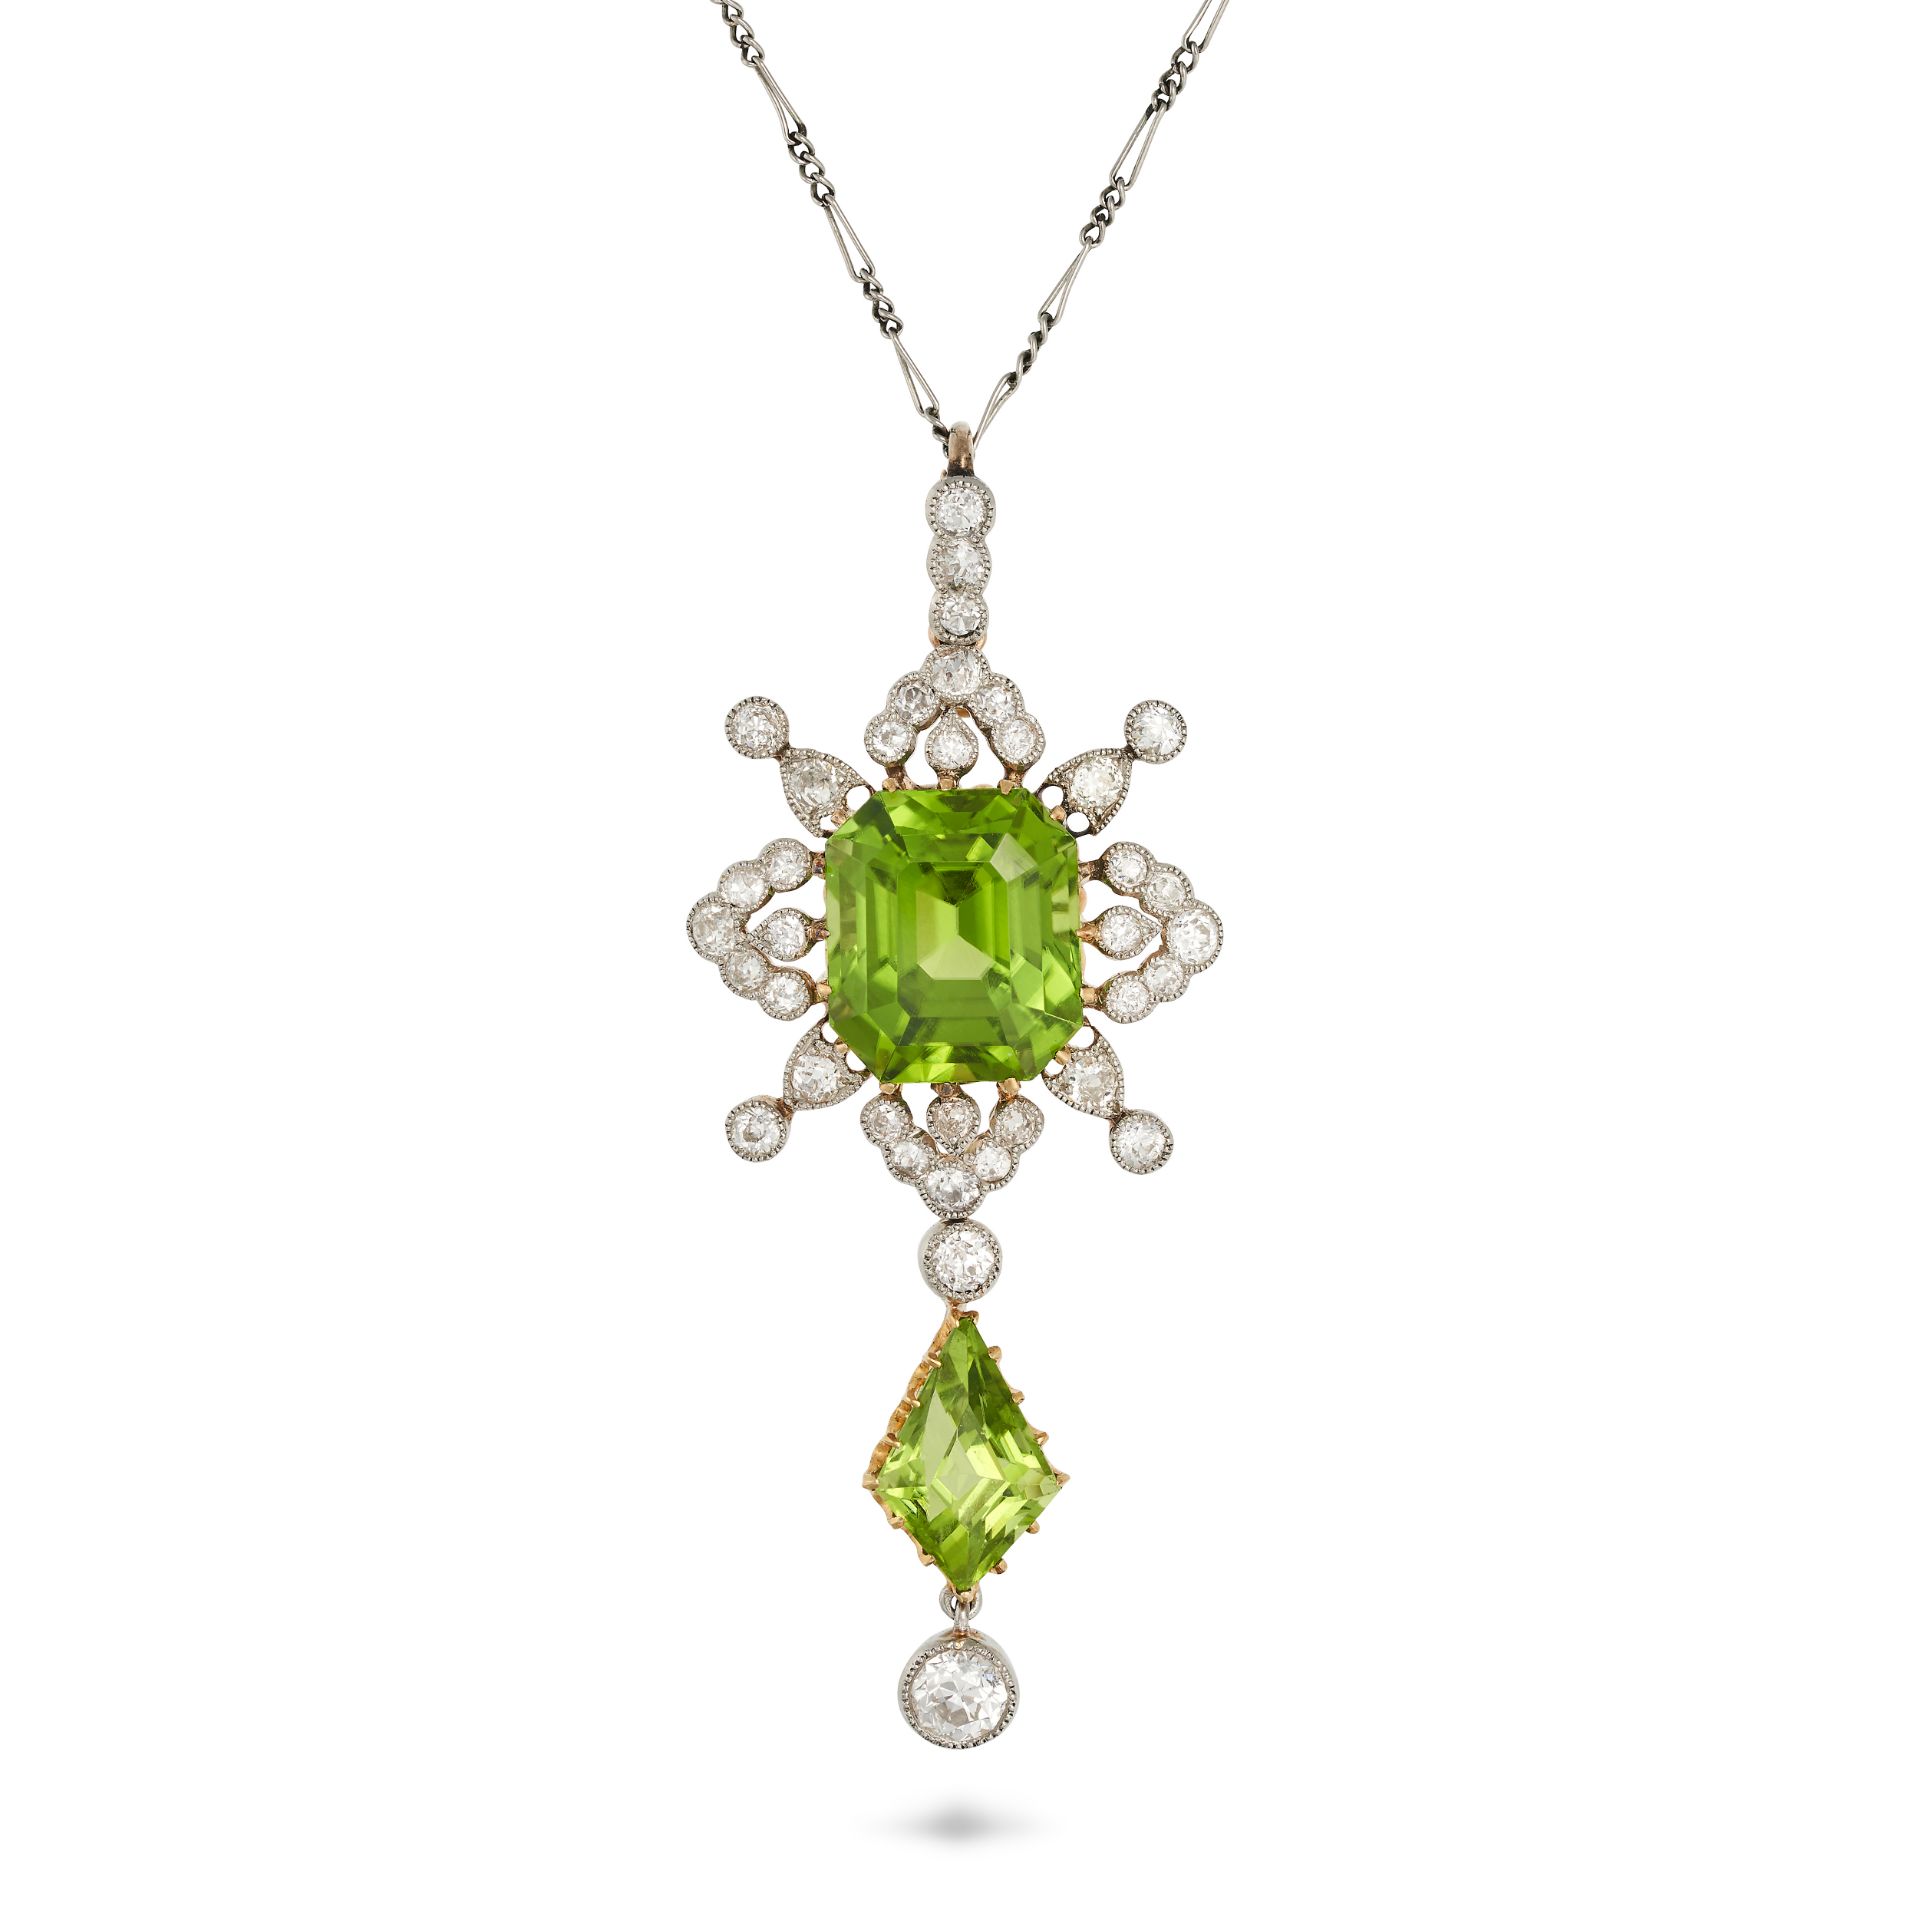 AN ANTIQUE PERIDOT AND DIAMOND PENDANT NECKLACE in yellow gold and platinum, the pendant set with...